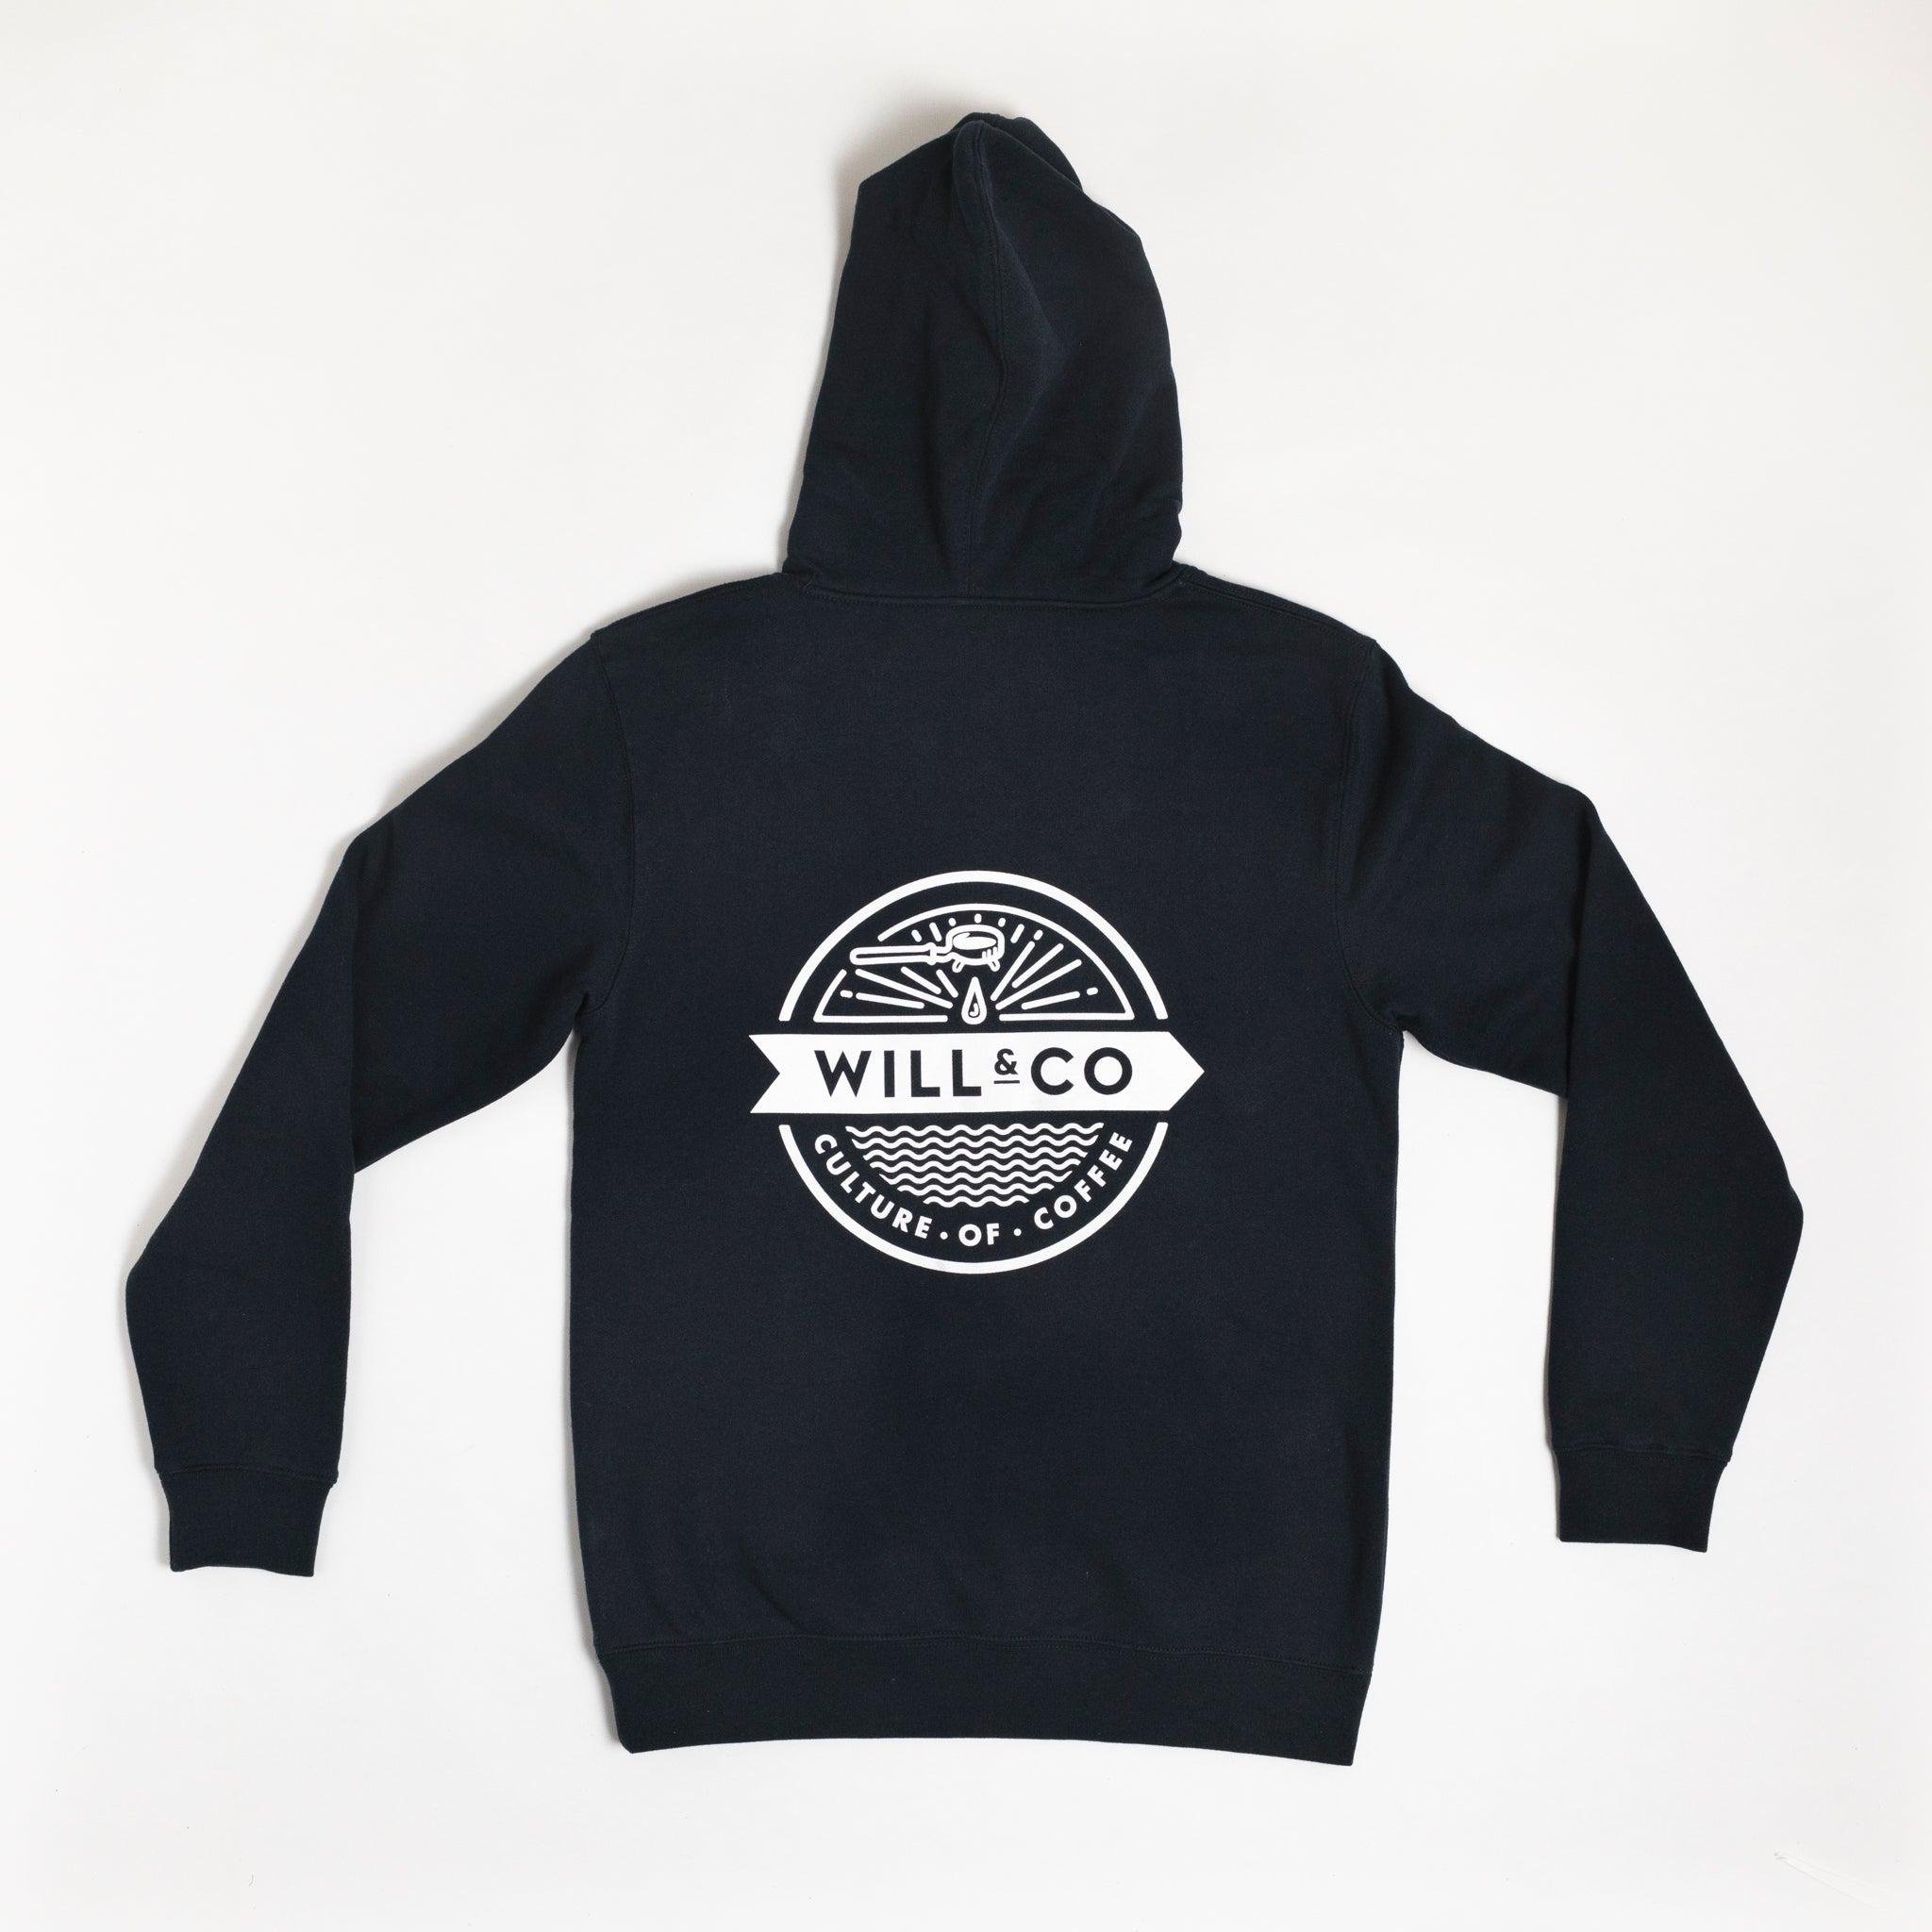 Will&Co Original Hoodie - Will & Co Coffee